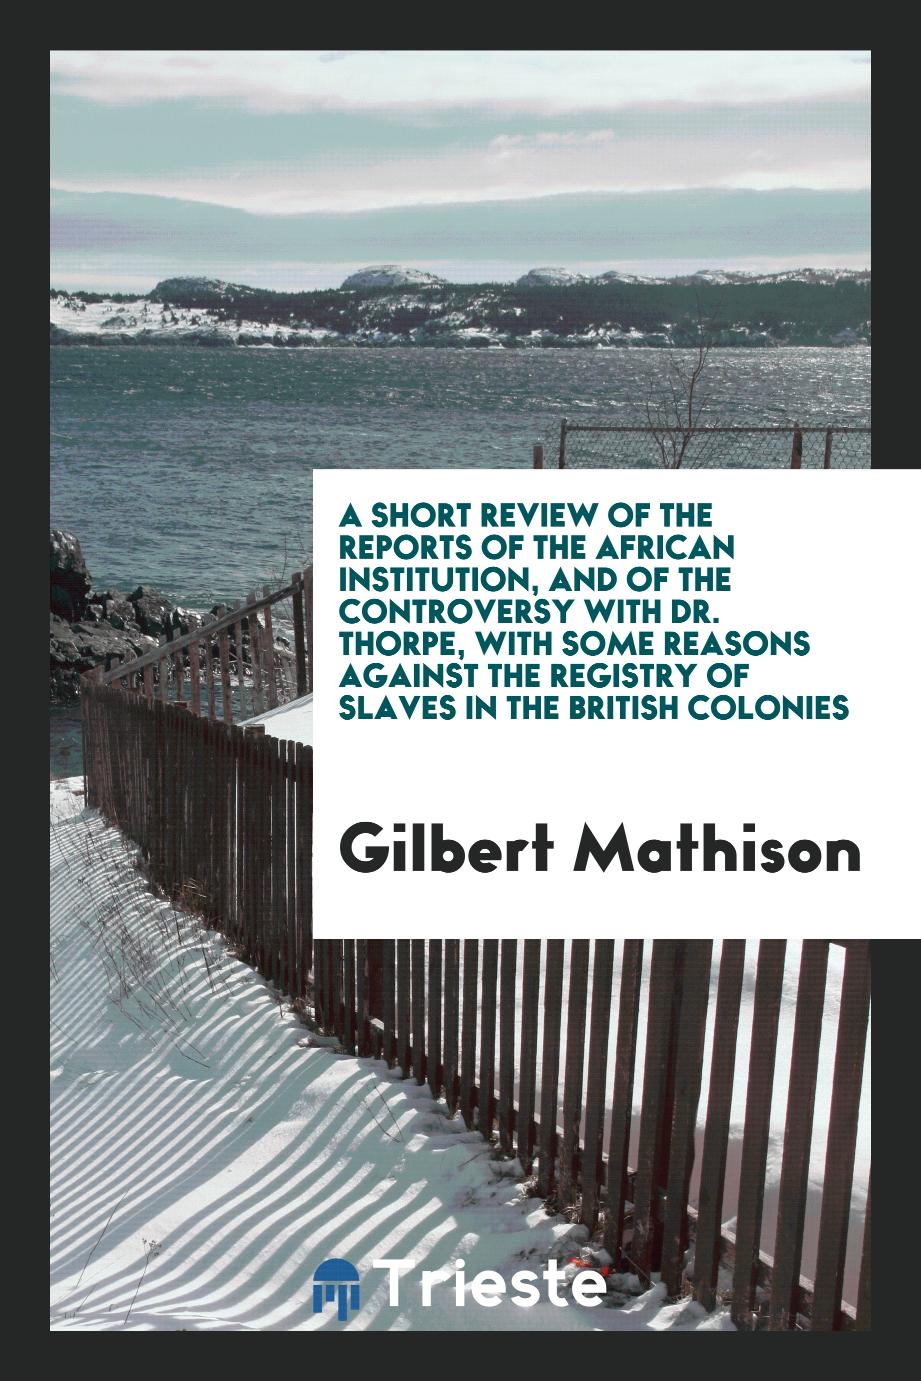 A short review of the reports of the African institution, and of the controversy with dr. Thorpe, with some reasons against the registry of slaves in the british colonies